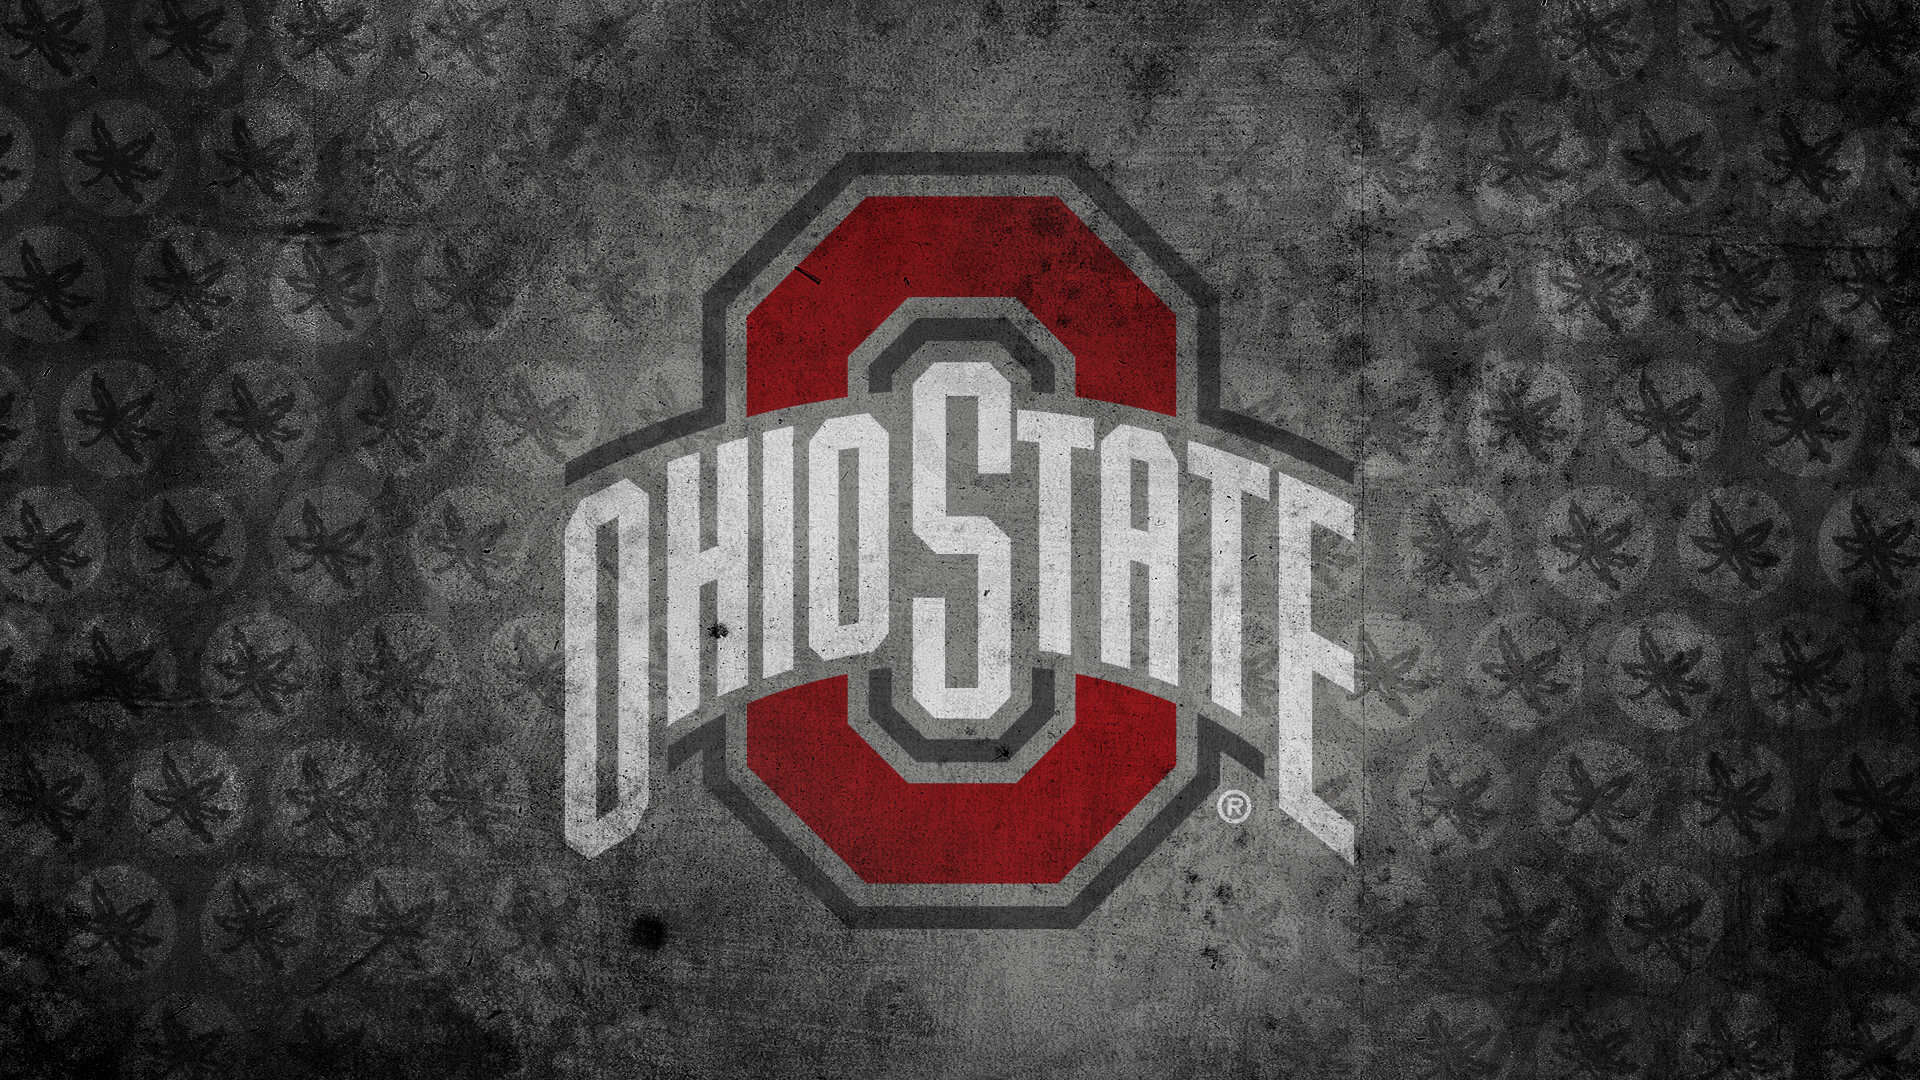 Ohio State Wallpaper 2015 - 1080p by